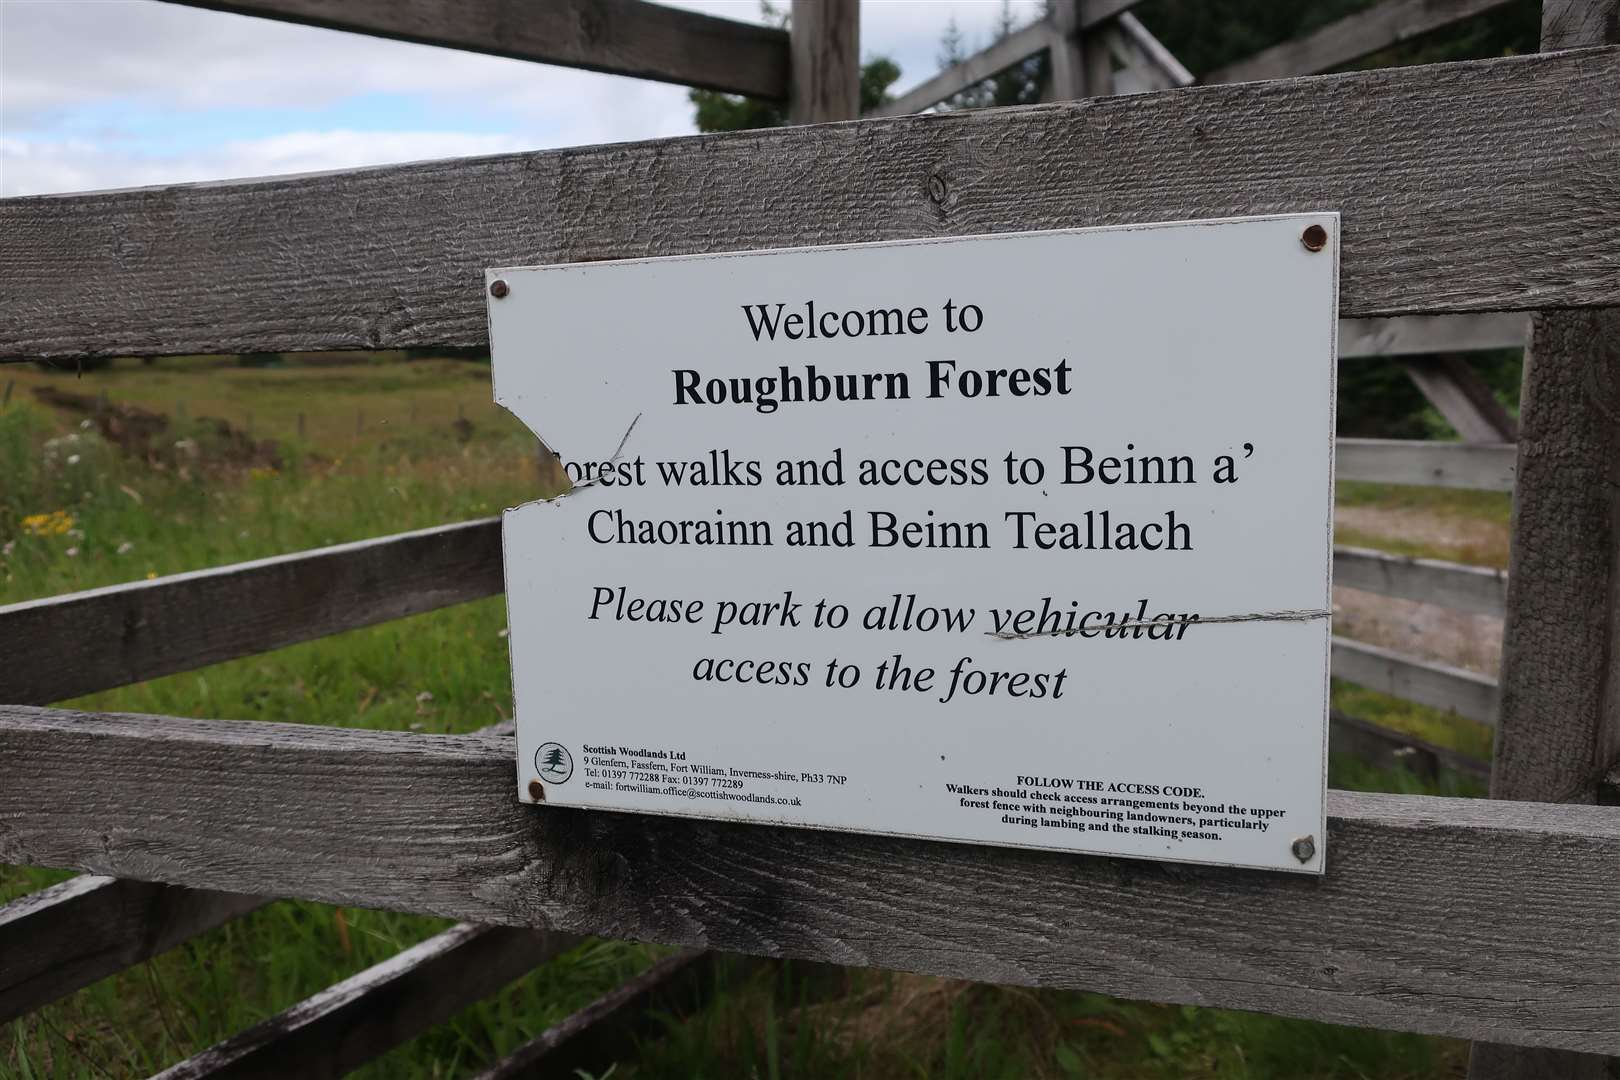 A welcome sign at the entrance to Roughburn Forest.